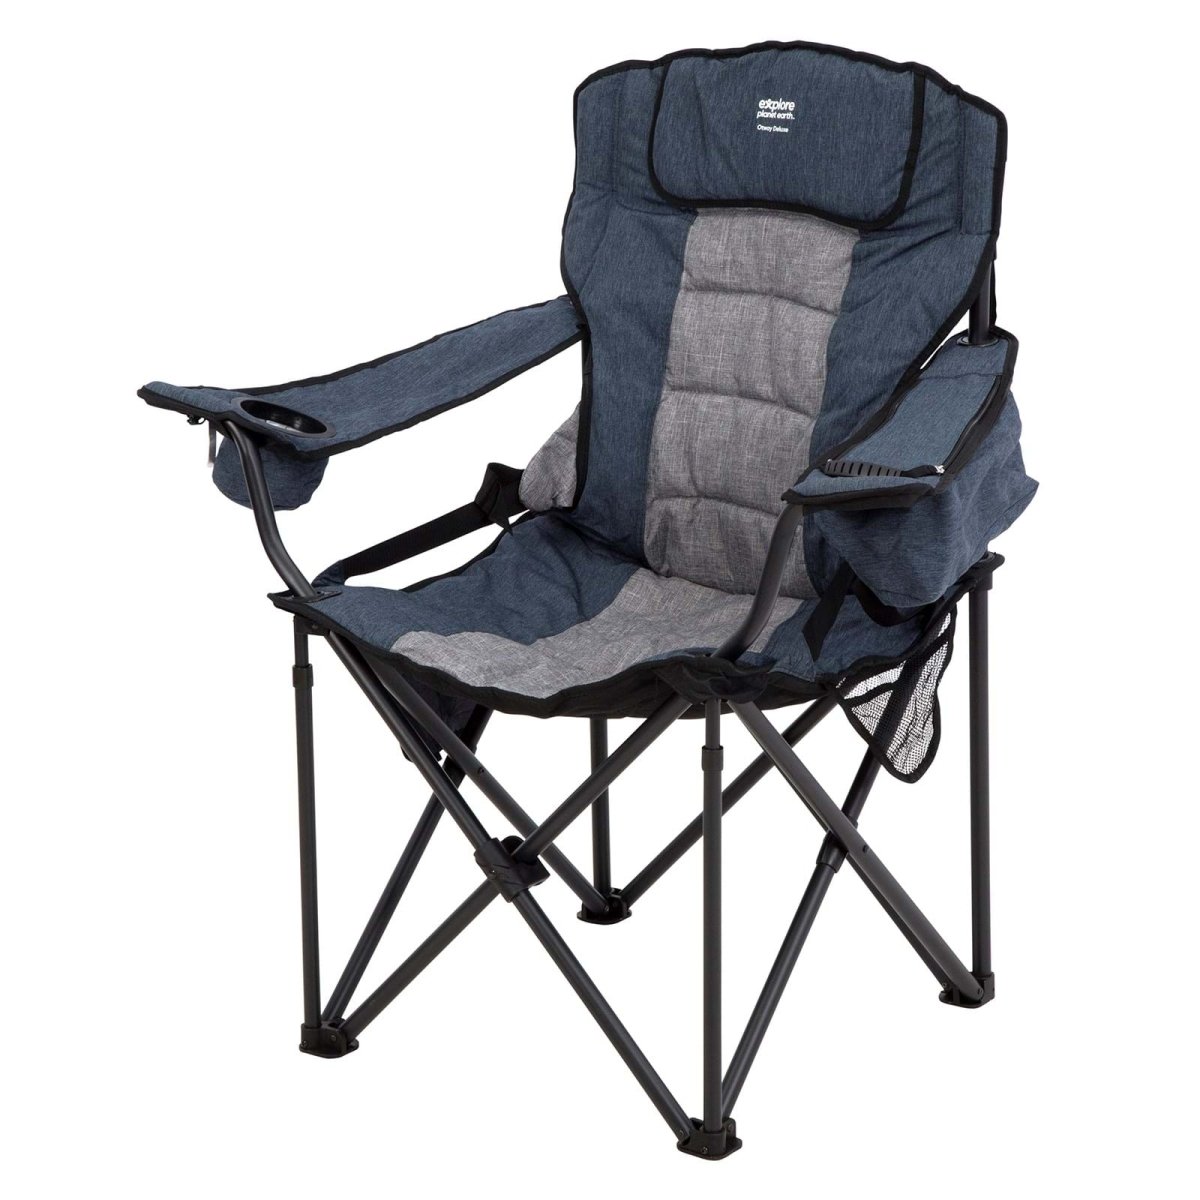 Otway Deluxe Chair - Explore Planet Earth | Explore Planet Earth | A247 Gear